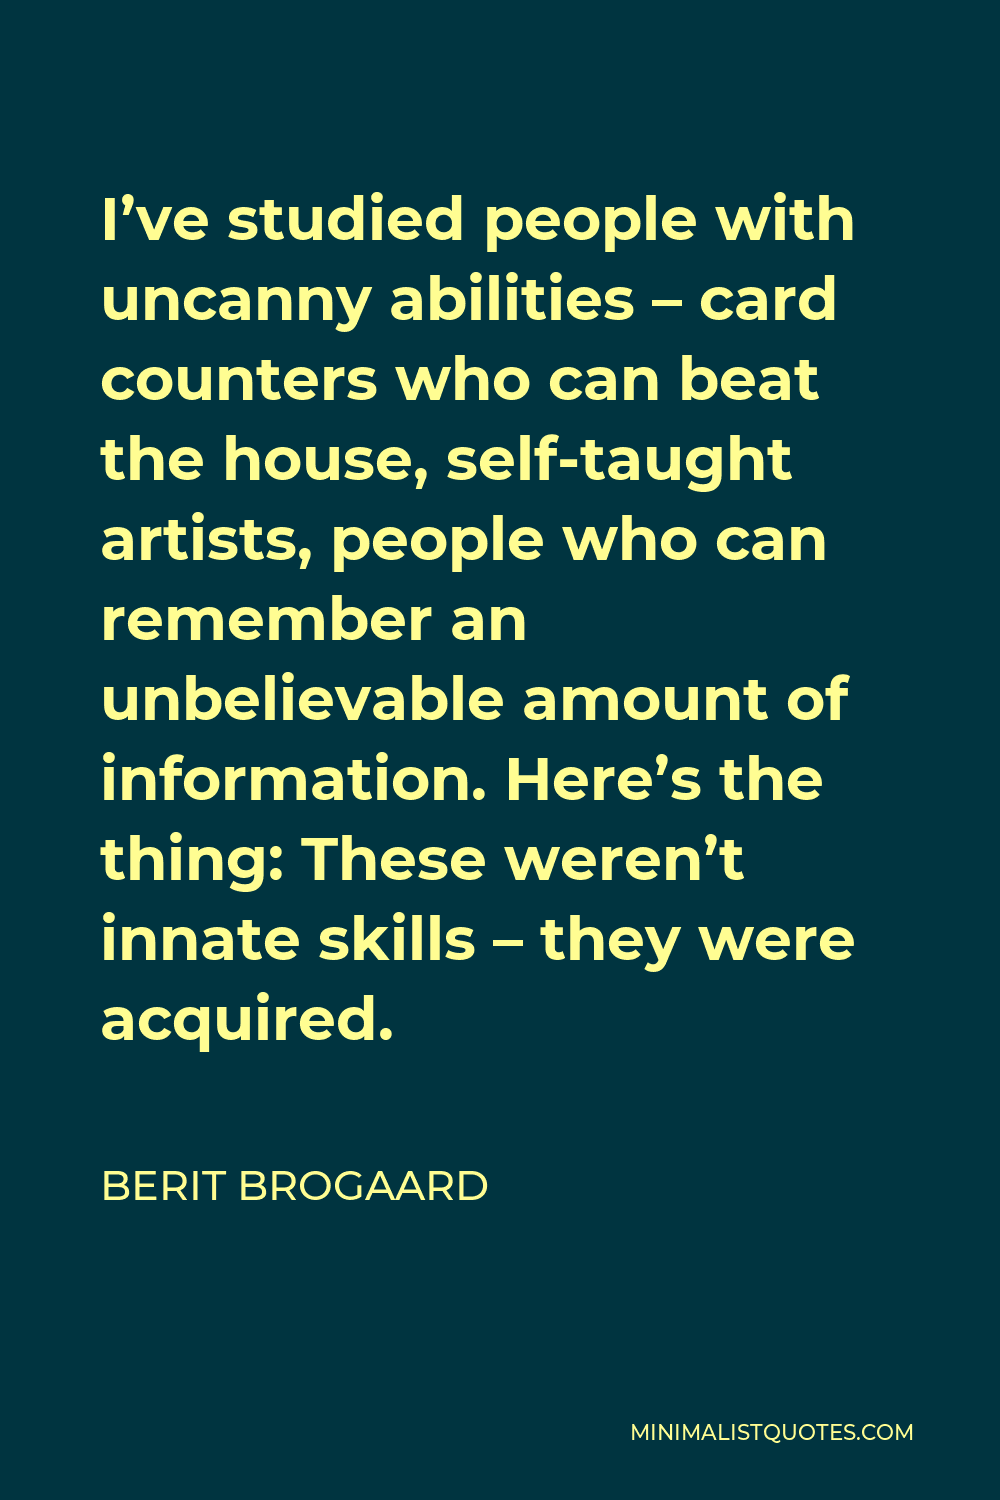 Berit Brogaard Quote - I’ve studied people with uncanny abilities – card counters who can beat the house, self-taught artists, people who can remember an unbelievable amount of information. Here’s the thing: These weren’t innate skills – they were acquired.